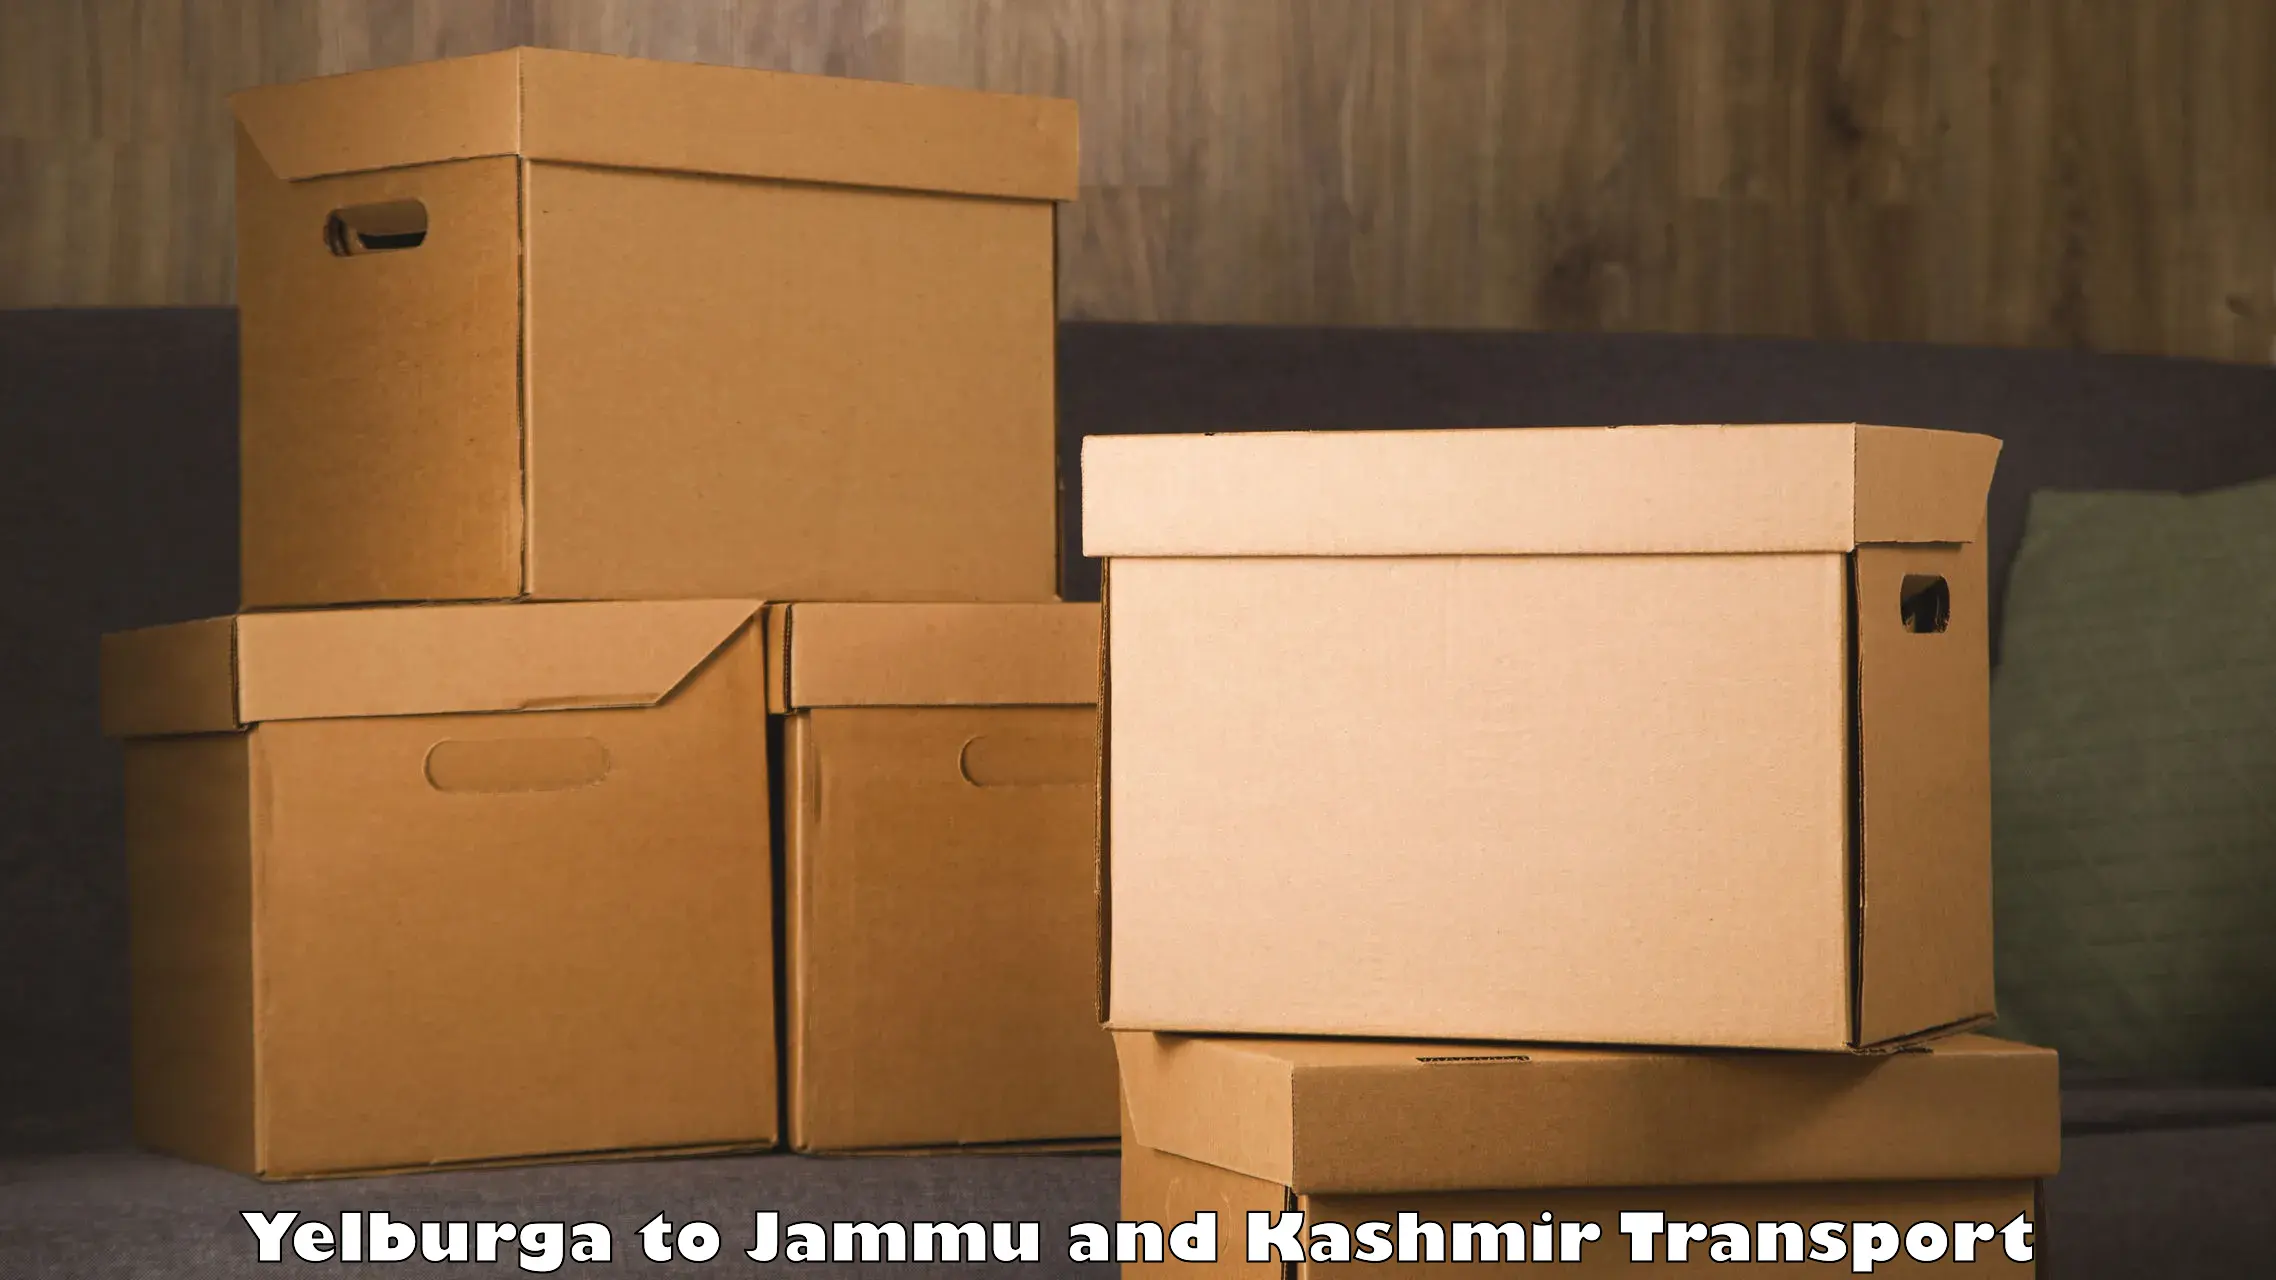 Parcel transport services in Yelburga to Shopian